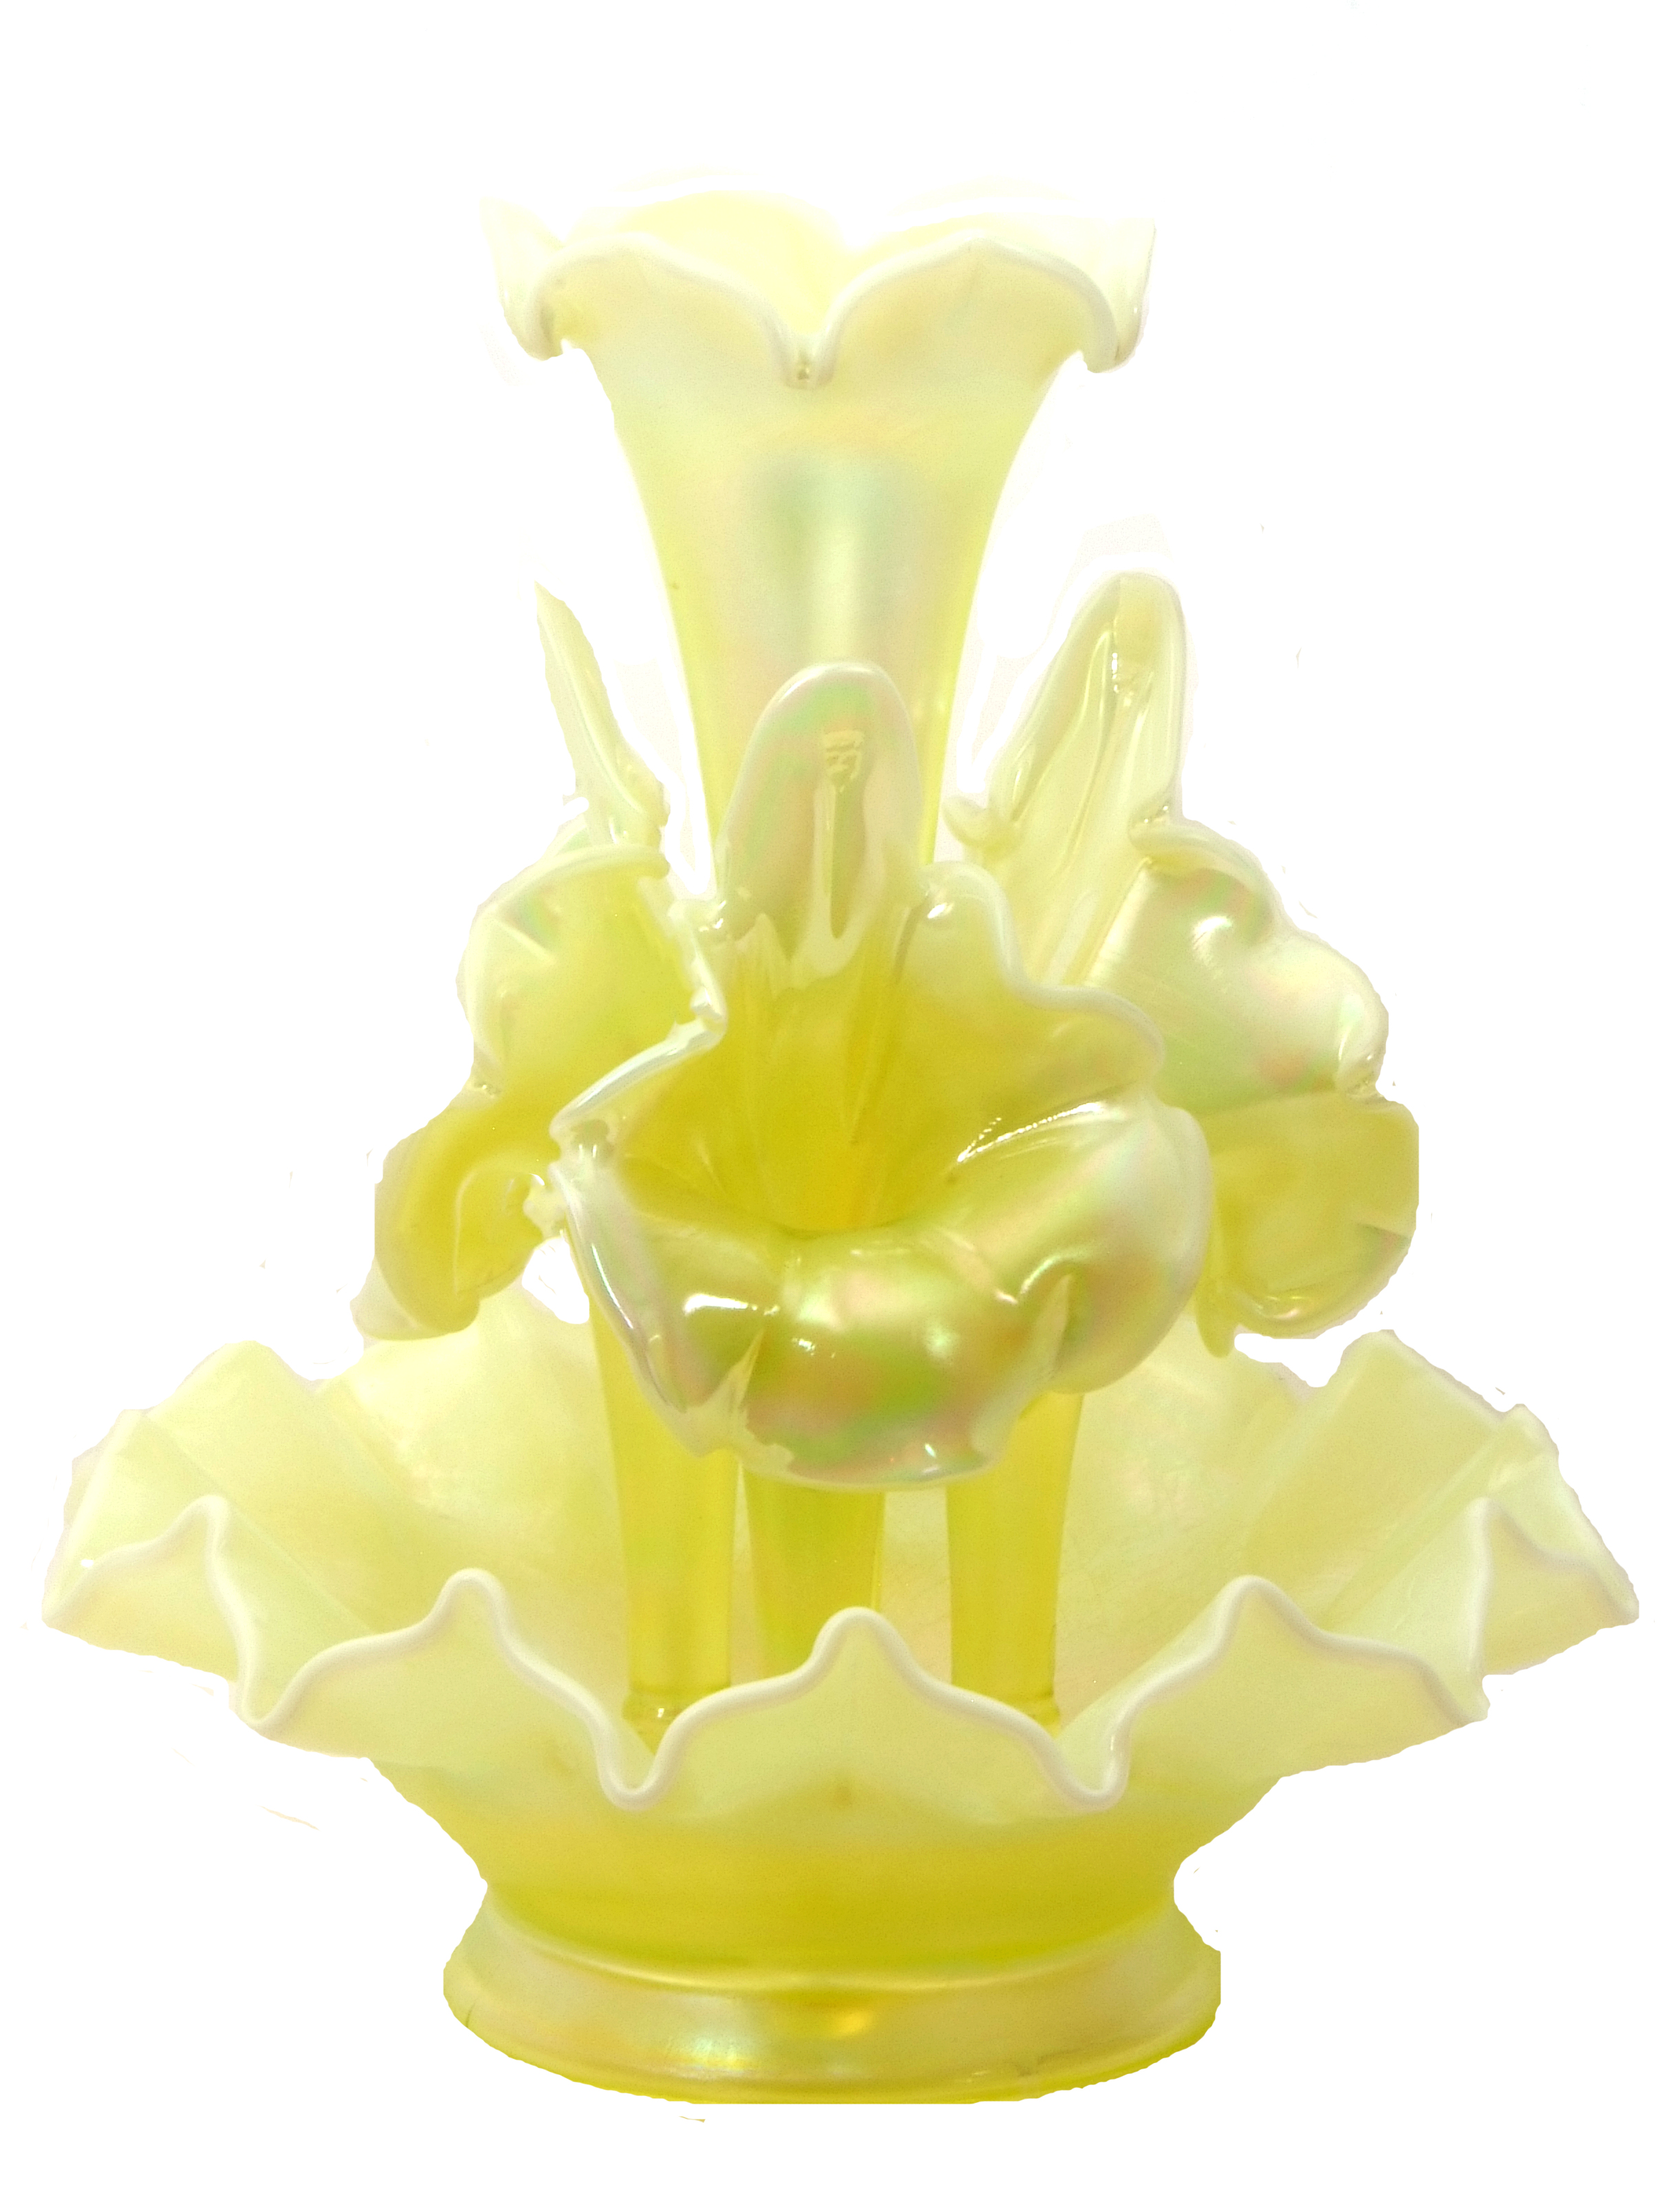 Fenton Art Glass green opalescent epergne, 32cm high - Image 3 of 3